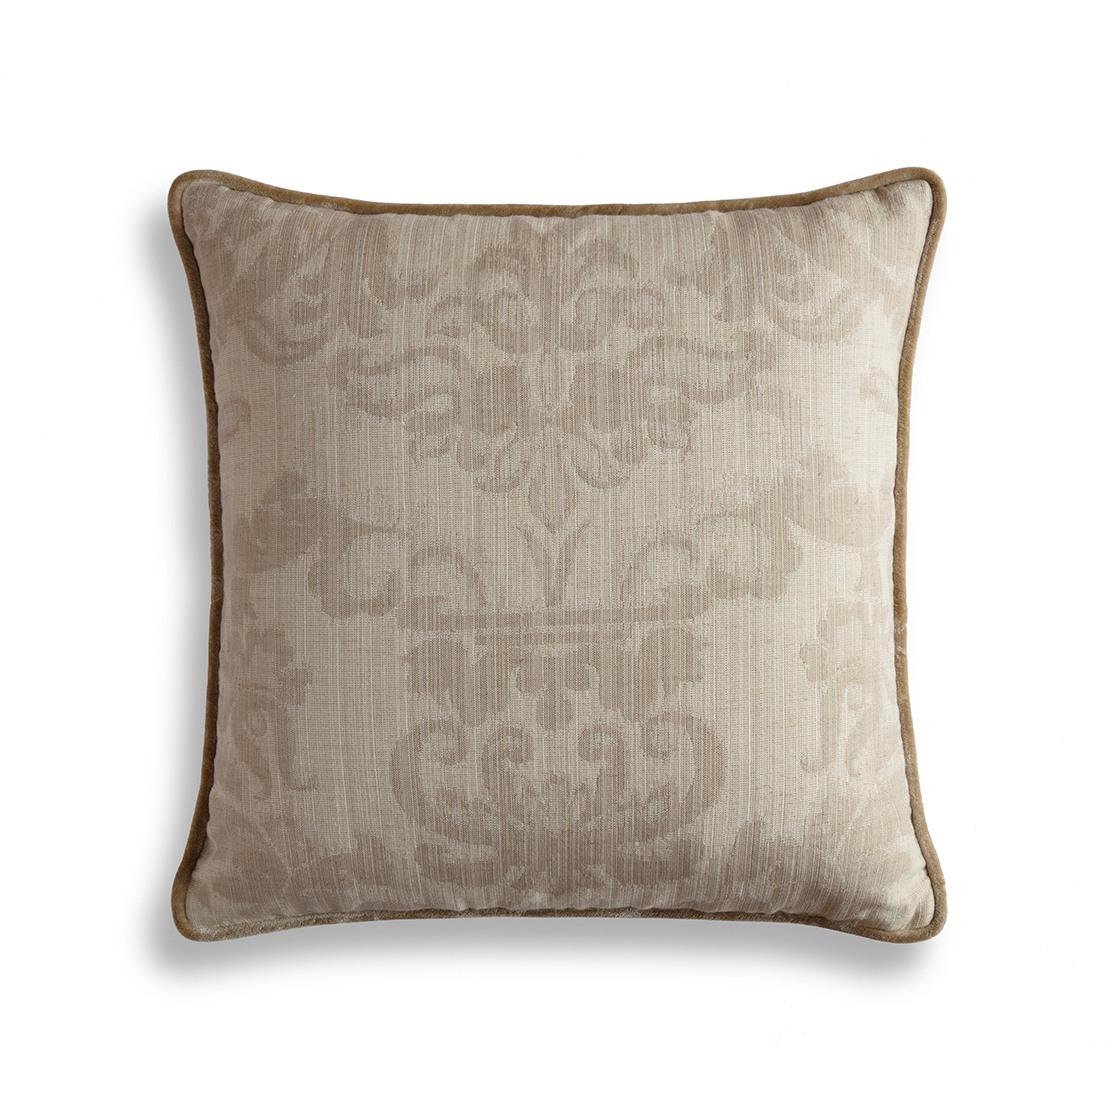 Wicklow - Oatmeal classic cushion with Capri - Sable back - Beaumont & Fletcher